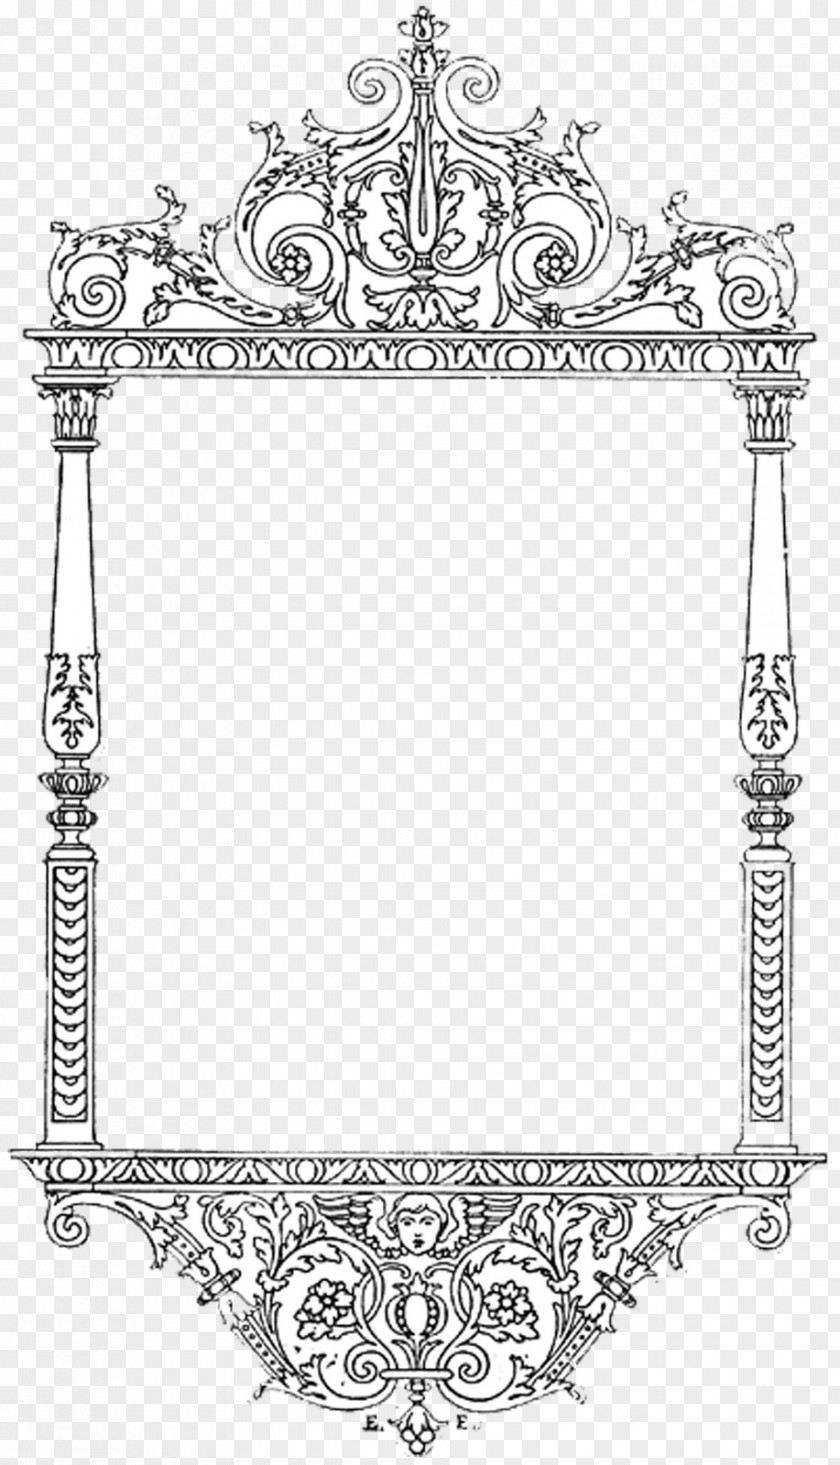 Vintage Border Borders And Frames Ornament Picture Clip Art PNG